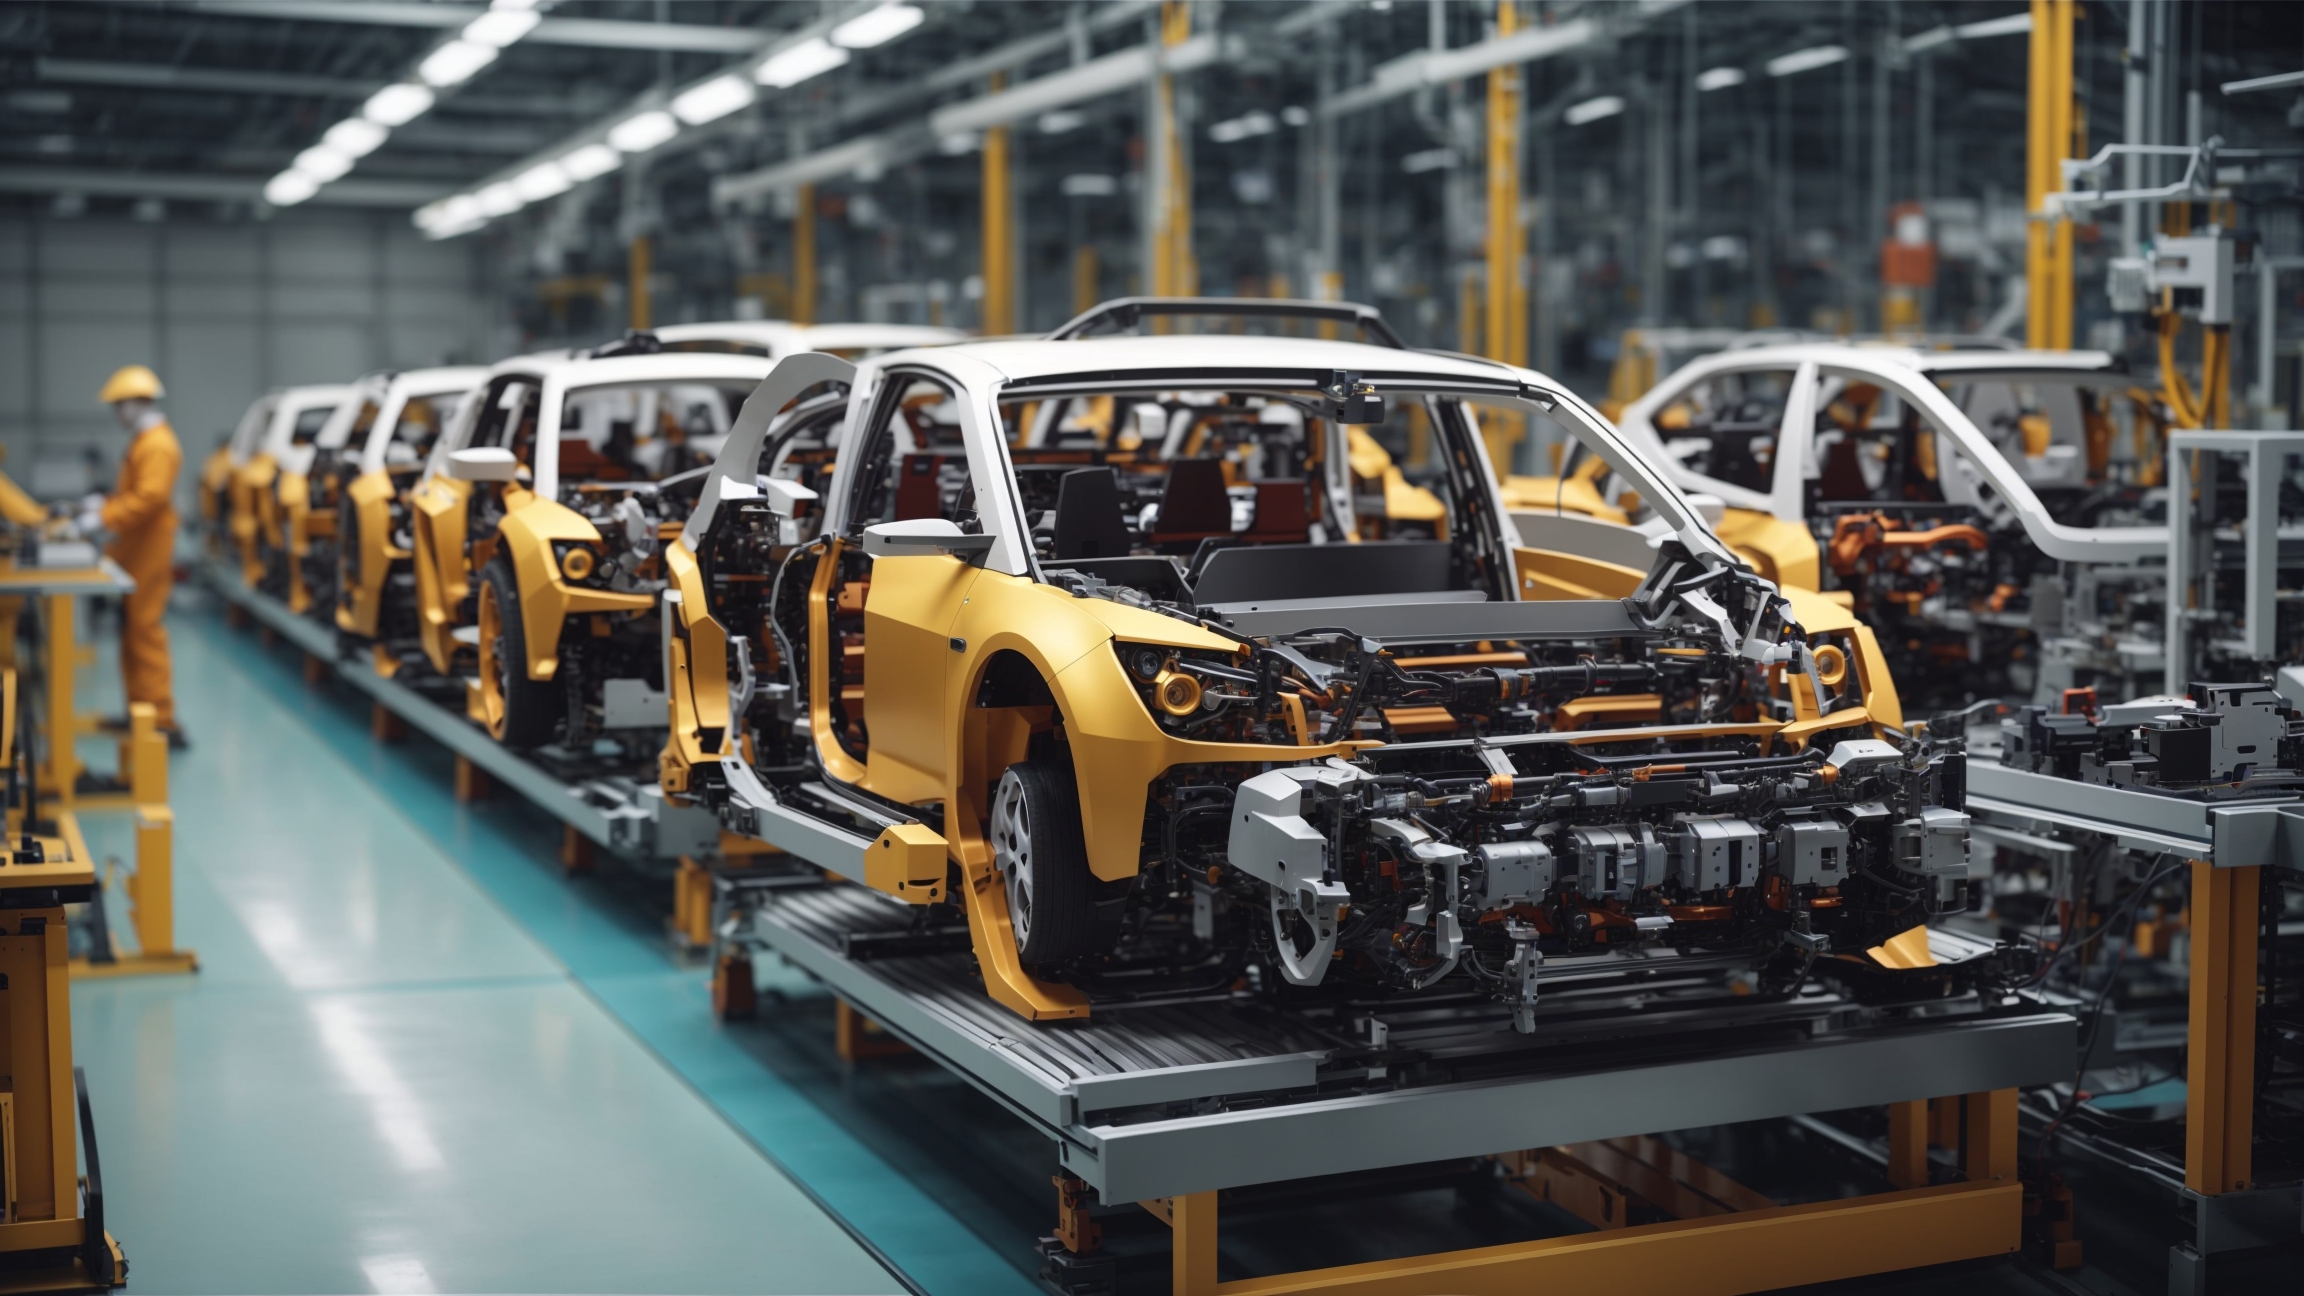 Leonardo.AI: "An award winning, photorealistic landscape image of a futuristic a car manufacturing factory, show an assembly line of the car batteries being manufactured by robotic machinery. Image needs to be highly detailed and high quality."